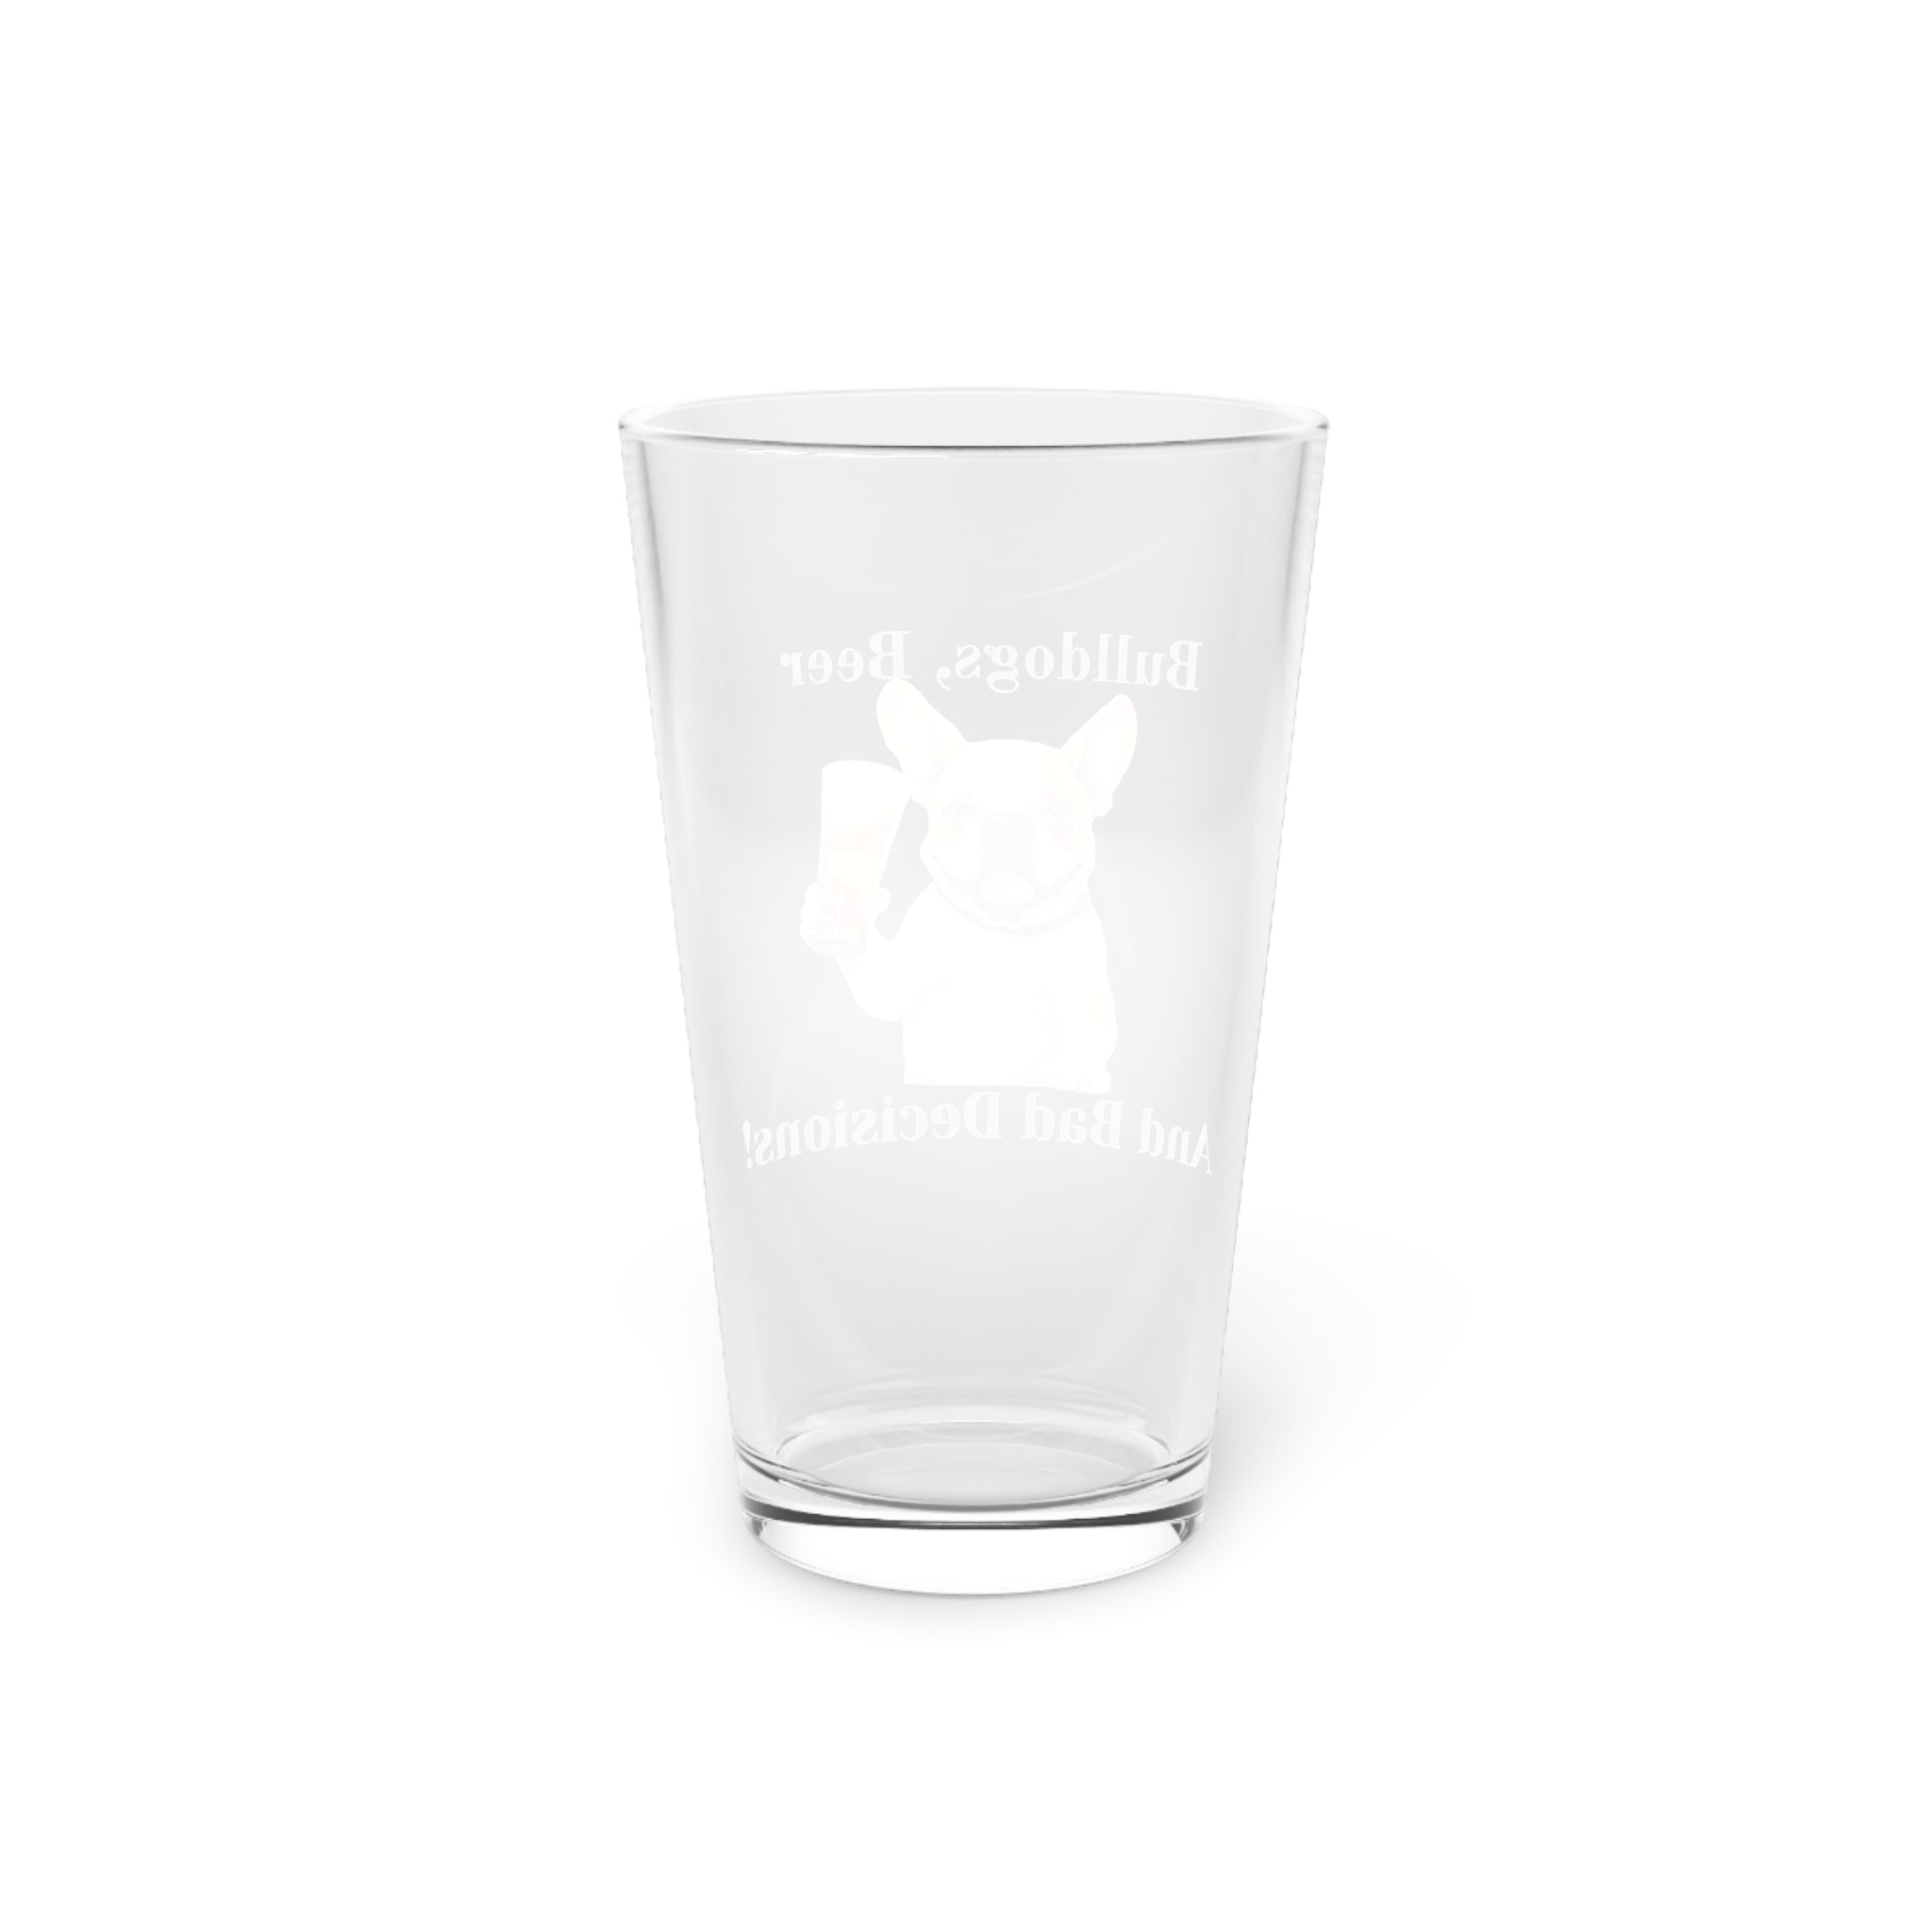 Bulldogs, Beer, and Bad Decisions!" - The Ultimate Pint Glass by Tipsy Bully (French/white)